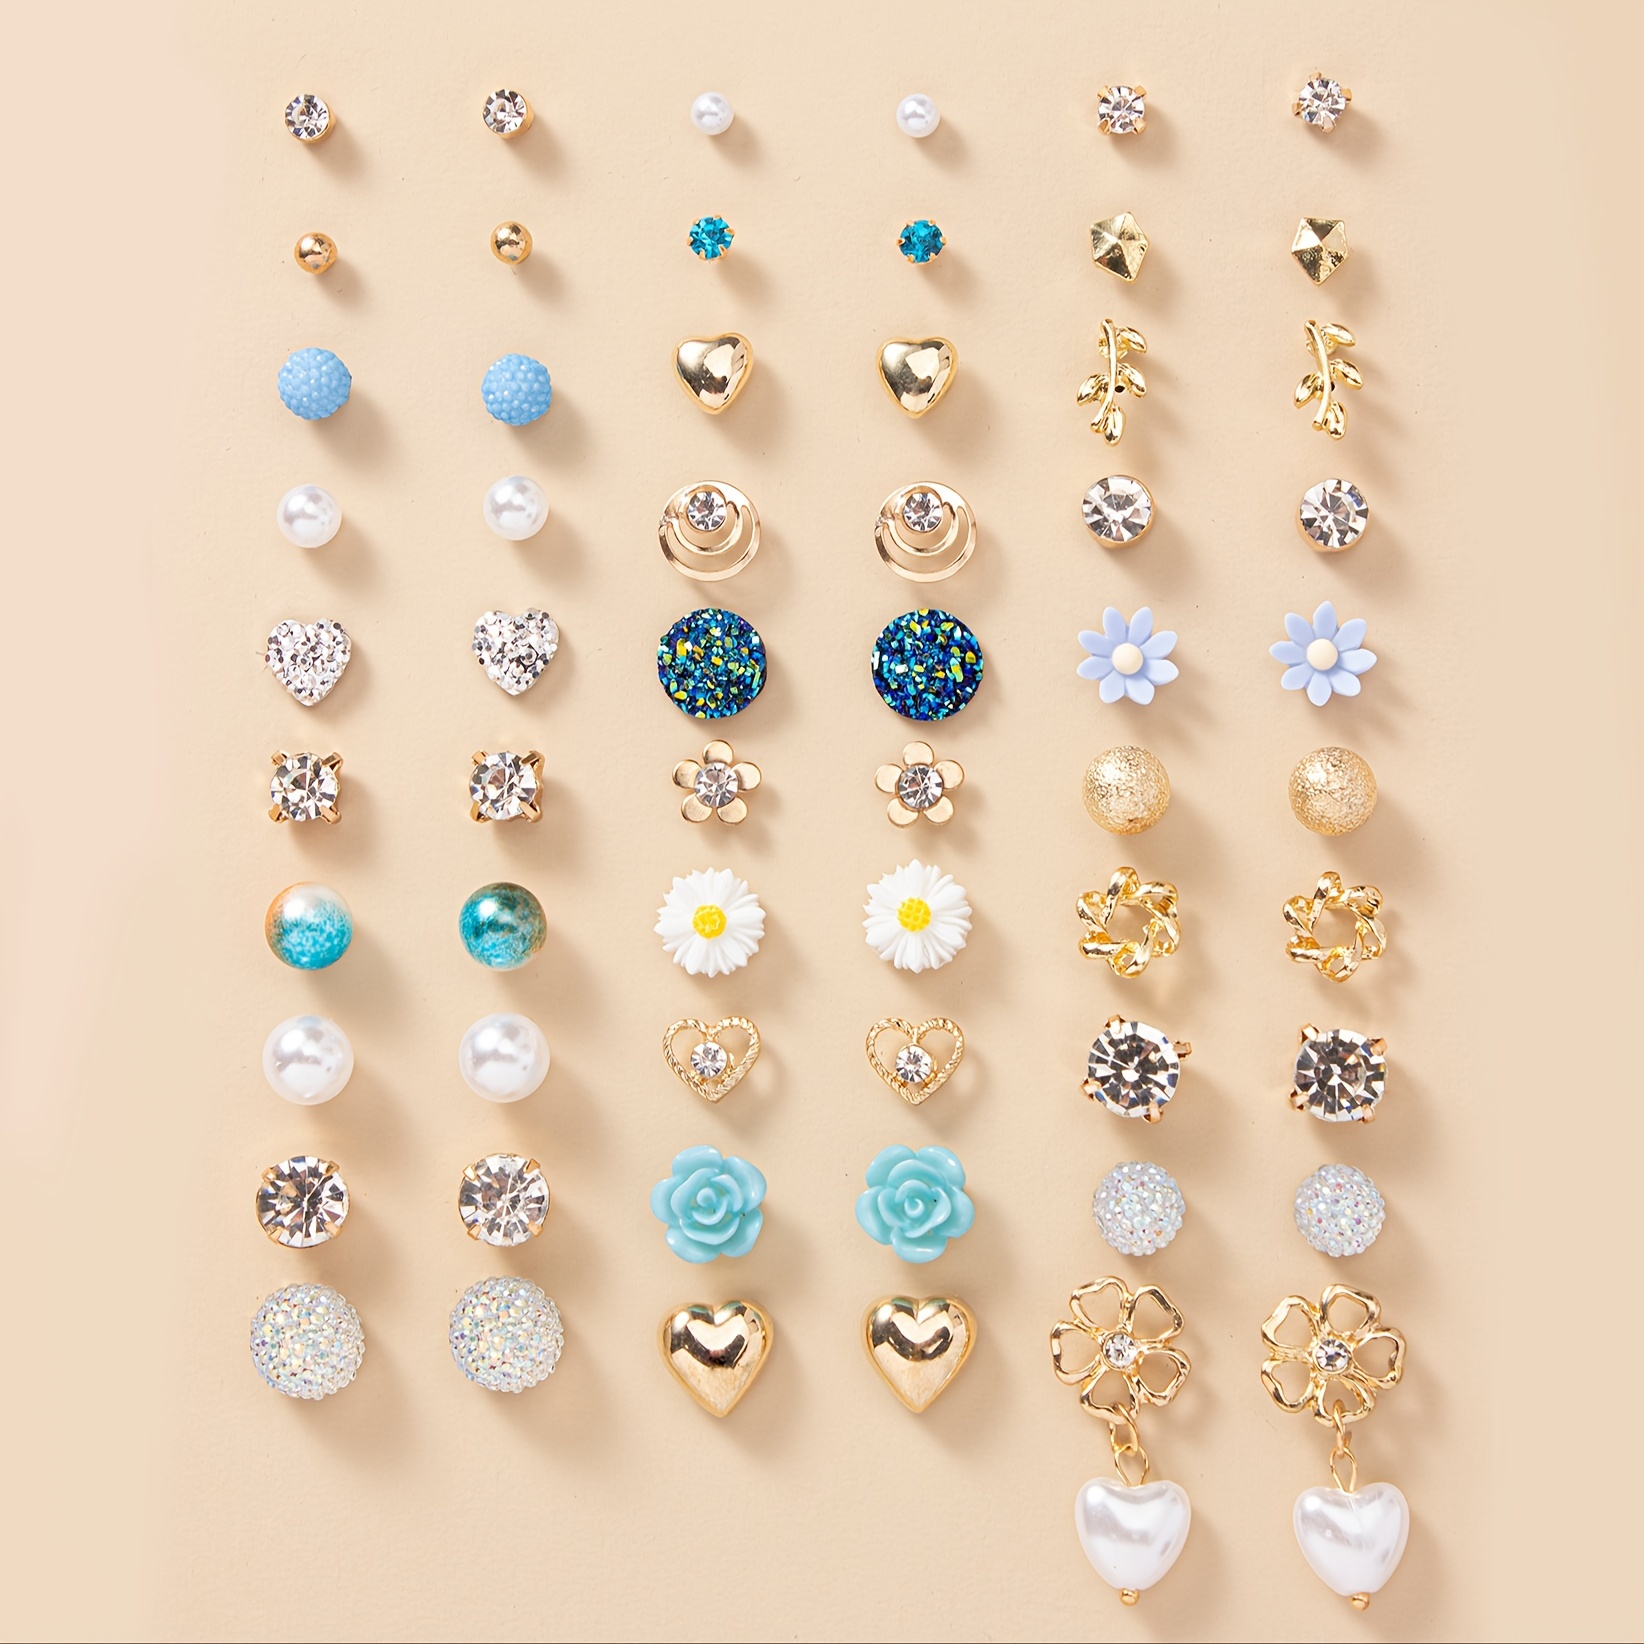 

30 Pairs Set Of Tiny Stud Earrings Zinc Alloy Jewelry Embellished With Shiny Zircon Elegant Leisure Style For Women Daily Wear